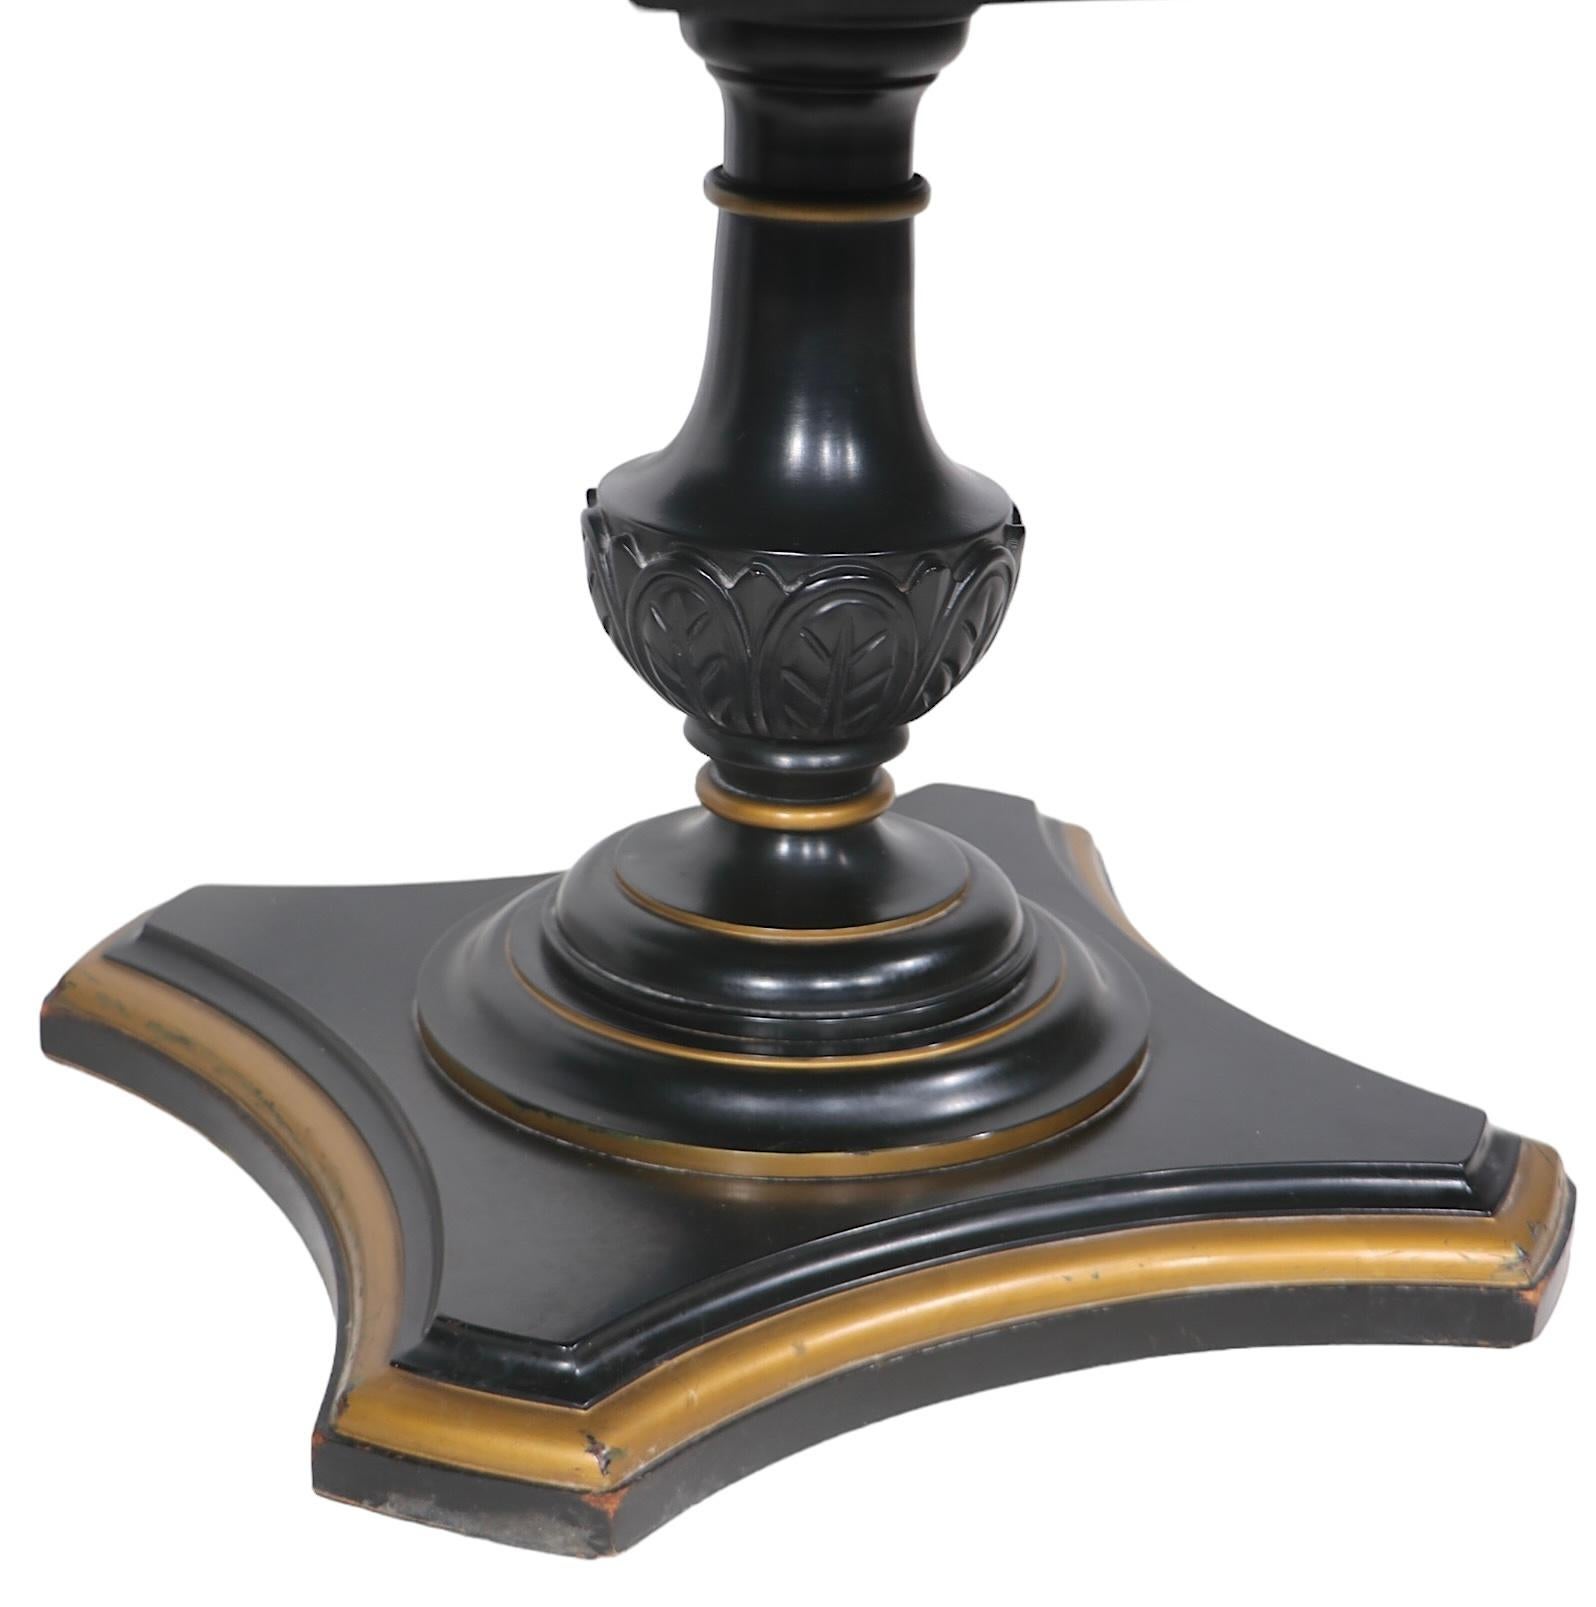 Pair of neoclassic, hollywood regency style end tables, having nice thick marble tops, which rest on hand carved wood pedestal bases in black paint finish with gold trim. The tables function as either end, side or lamp  tables. Both are in very